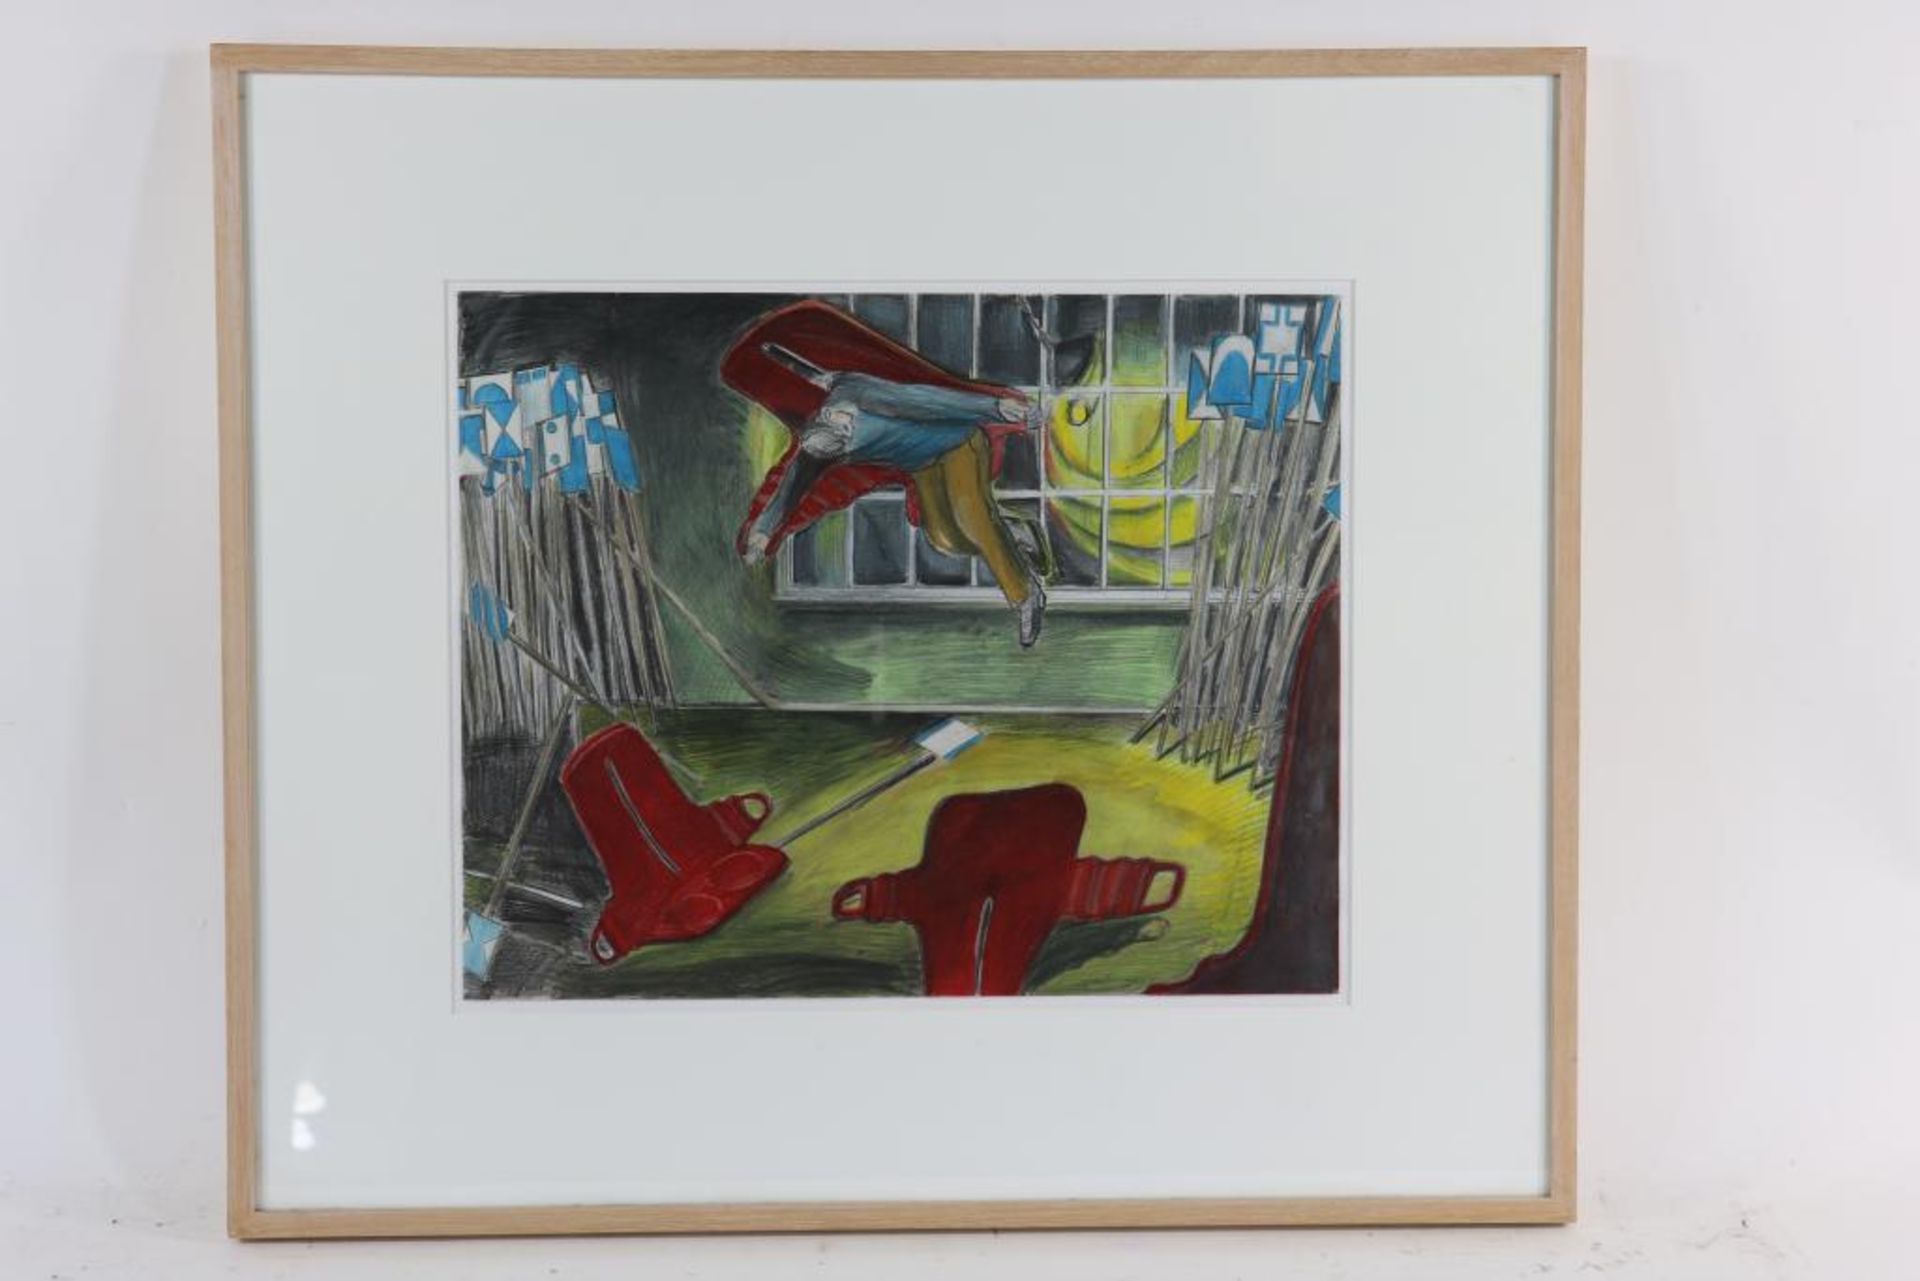 Klemann, Paul (1960), signed and dated, floating chairs in a room crammed with traffic signs, - Bild 2 aus 4